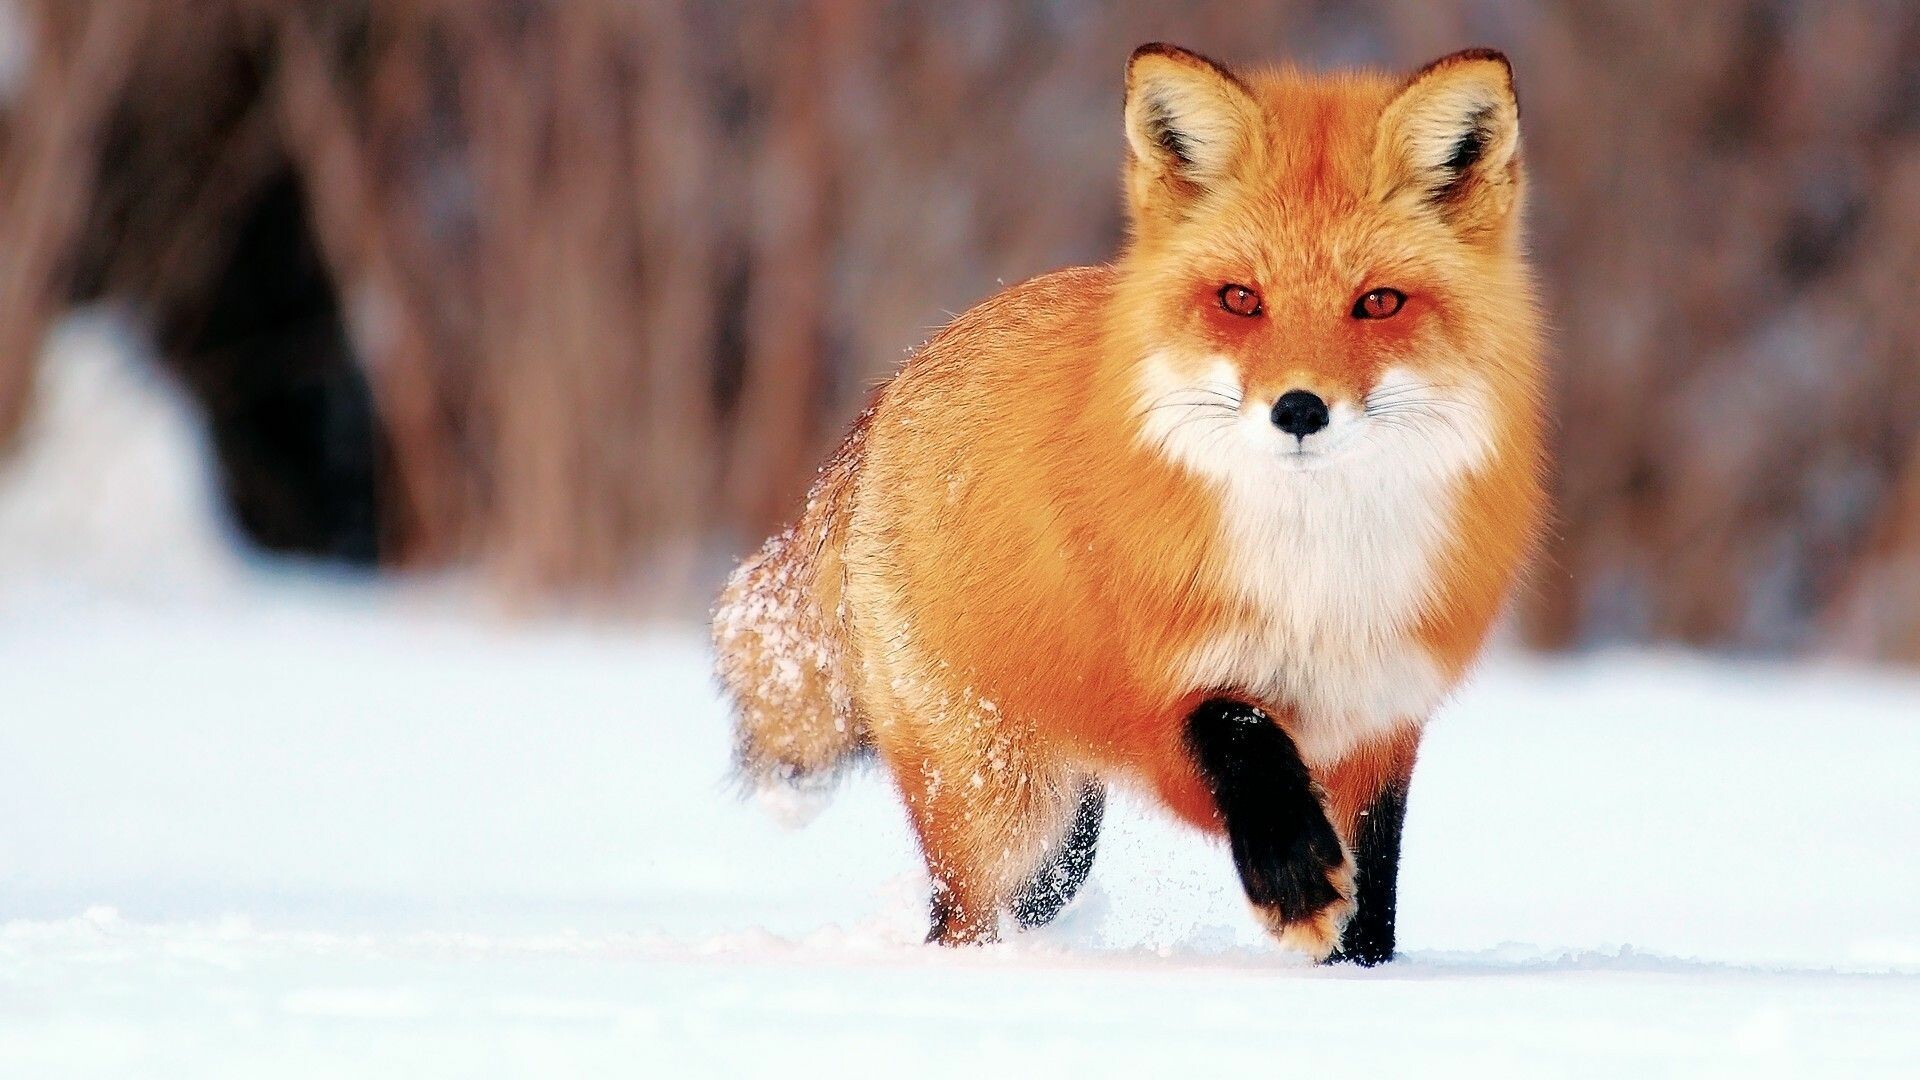 Fox: Identified by its reddish coat, black legs and ears, and long, white-tipped, bushy tail. 1920x1080 Full HD Wallpaper.